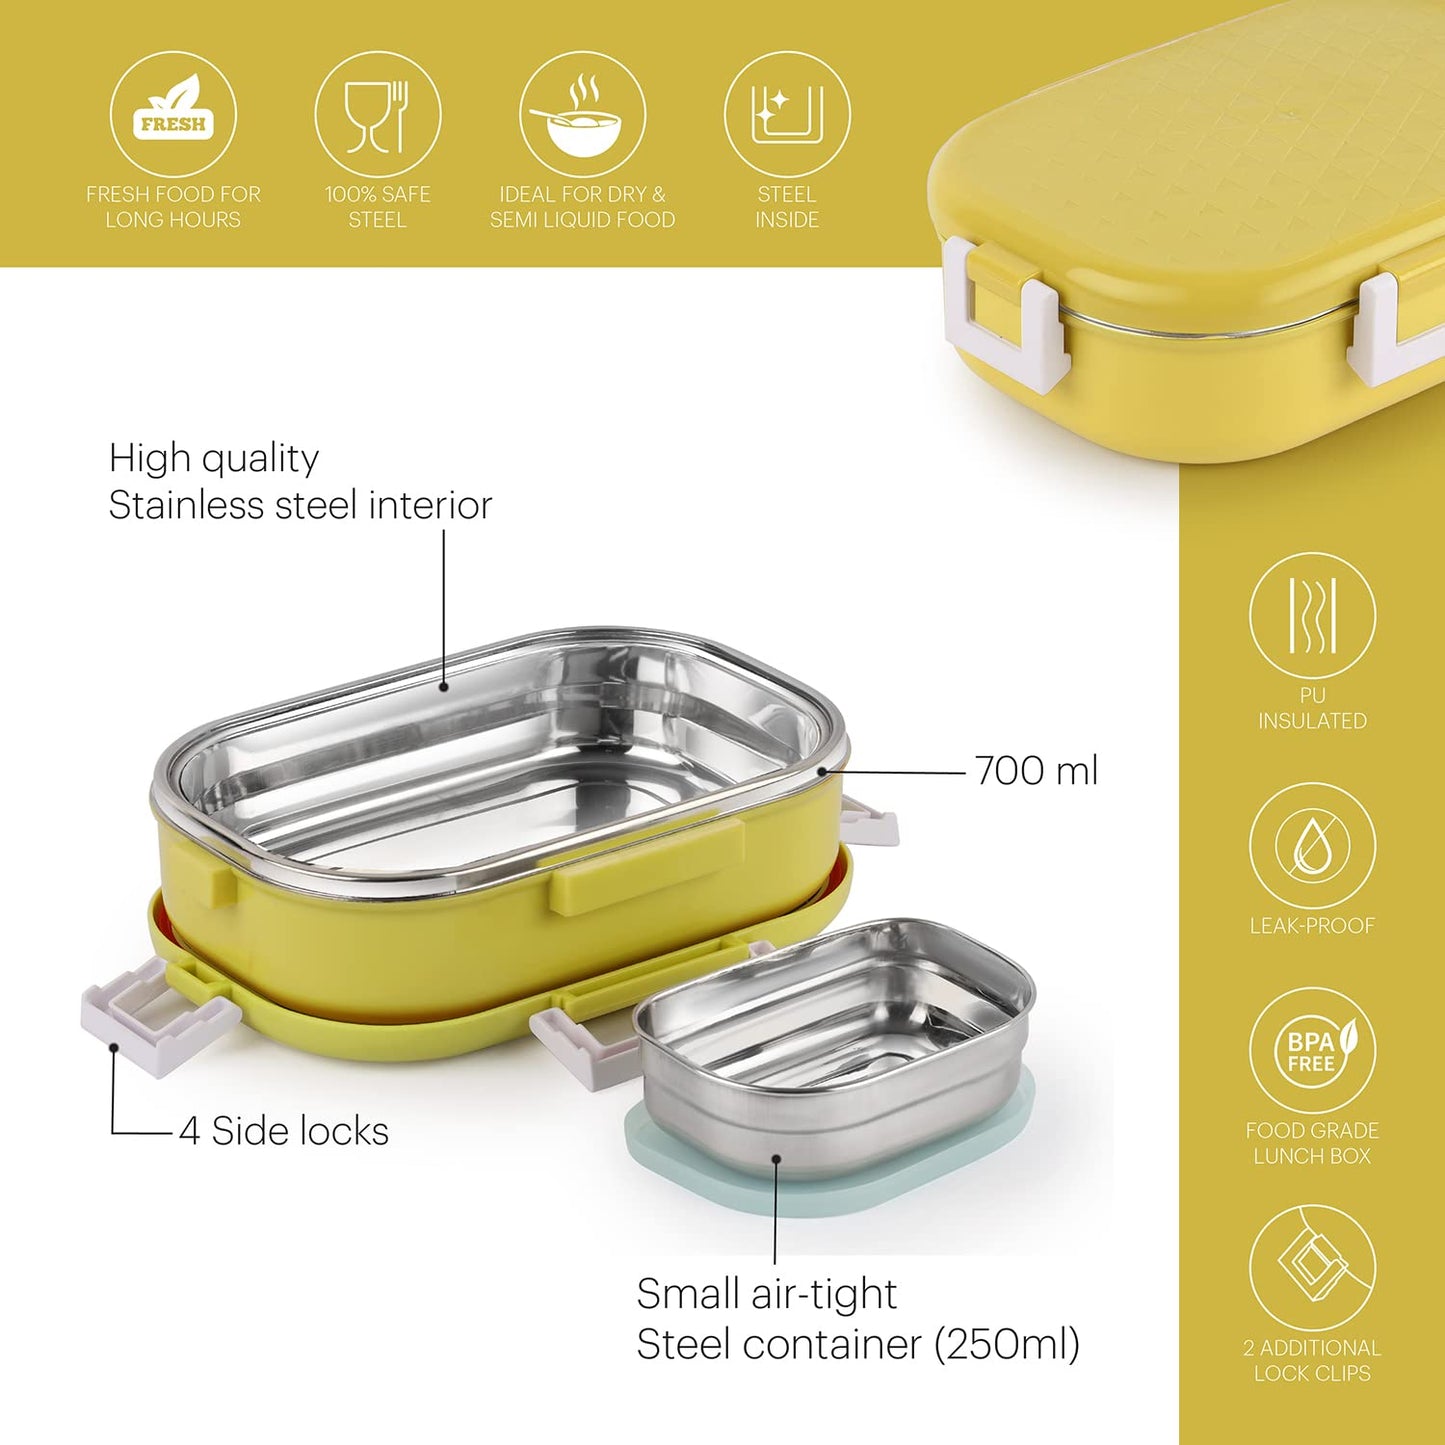 CELLO Altro Neo Lunch Box, Neo Yellow, 700ml | 2 Units Insulated Lunch Boxes |Stainless Steel Lunch Box for Kids | Leak-Proof Snacks Tiffin Box for School